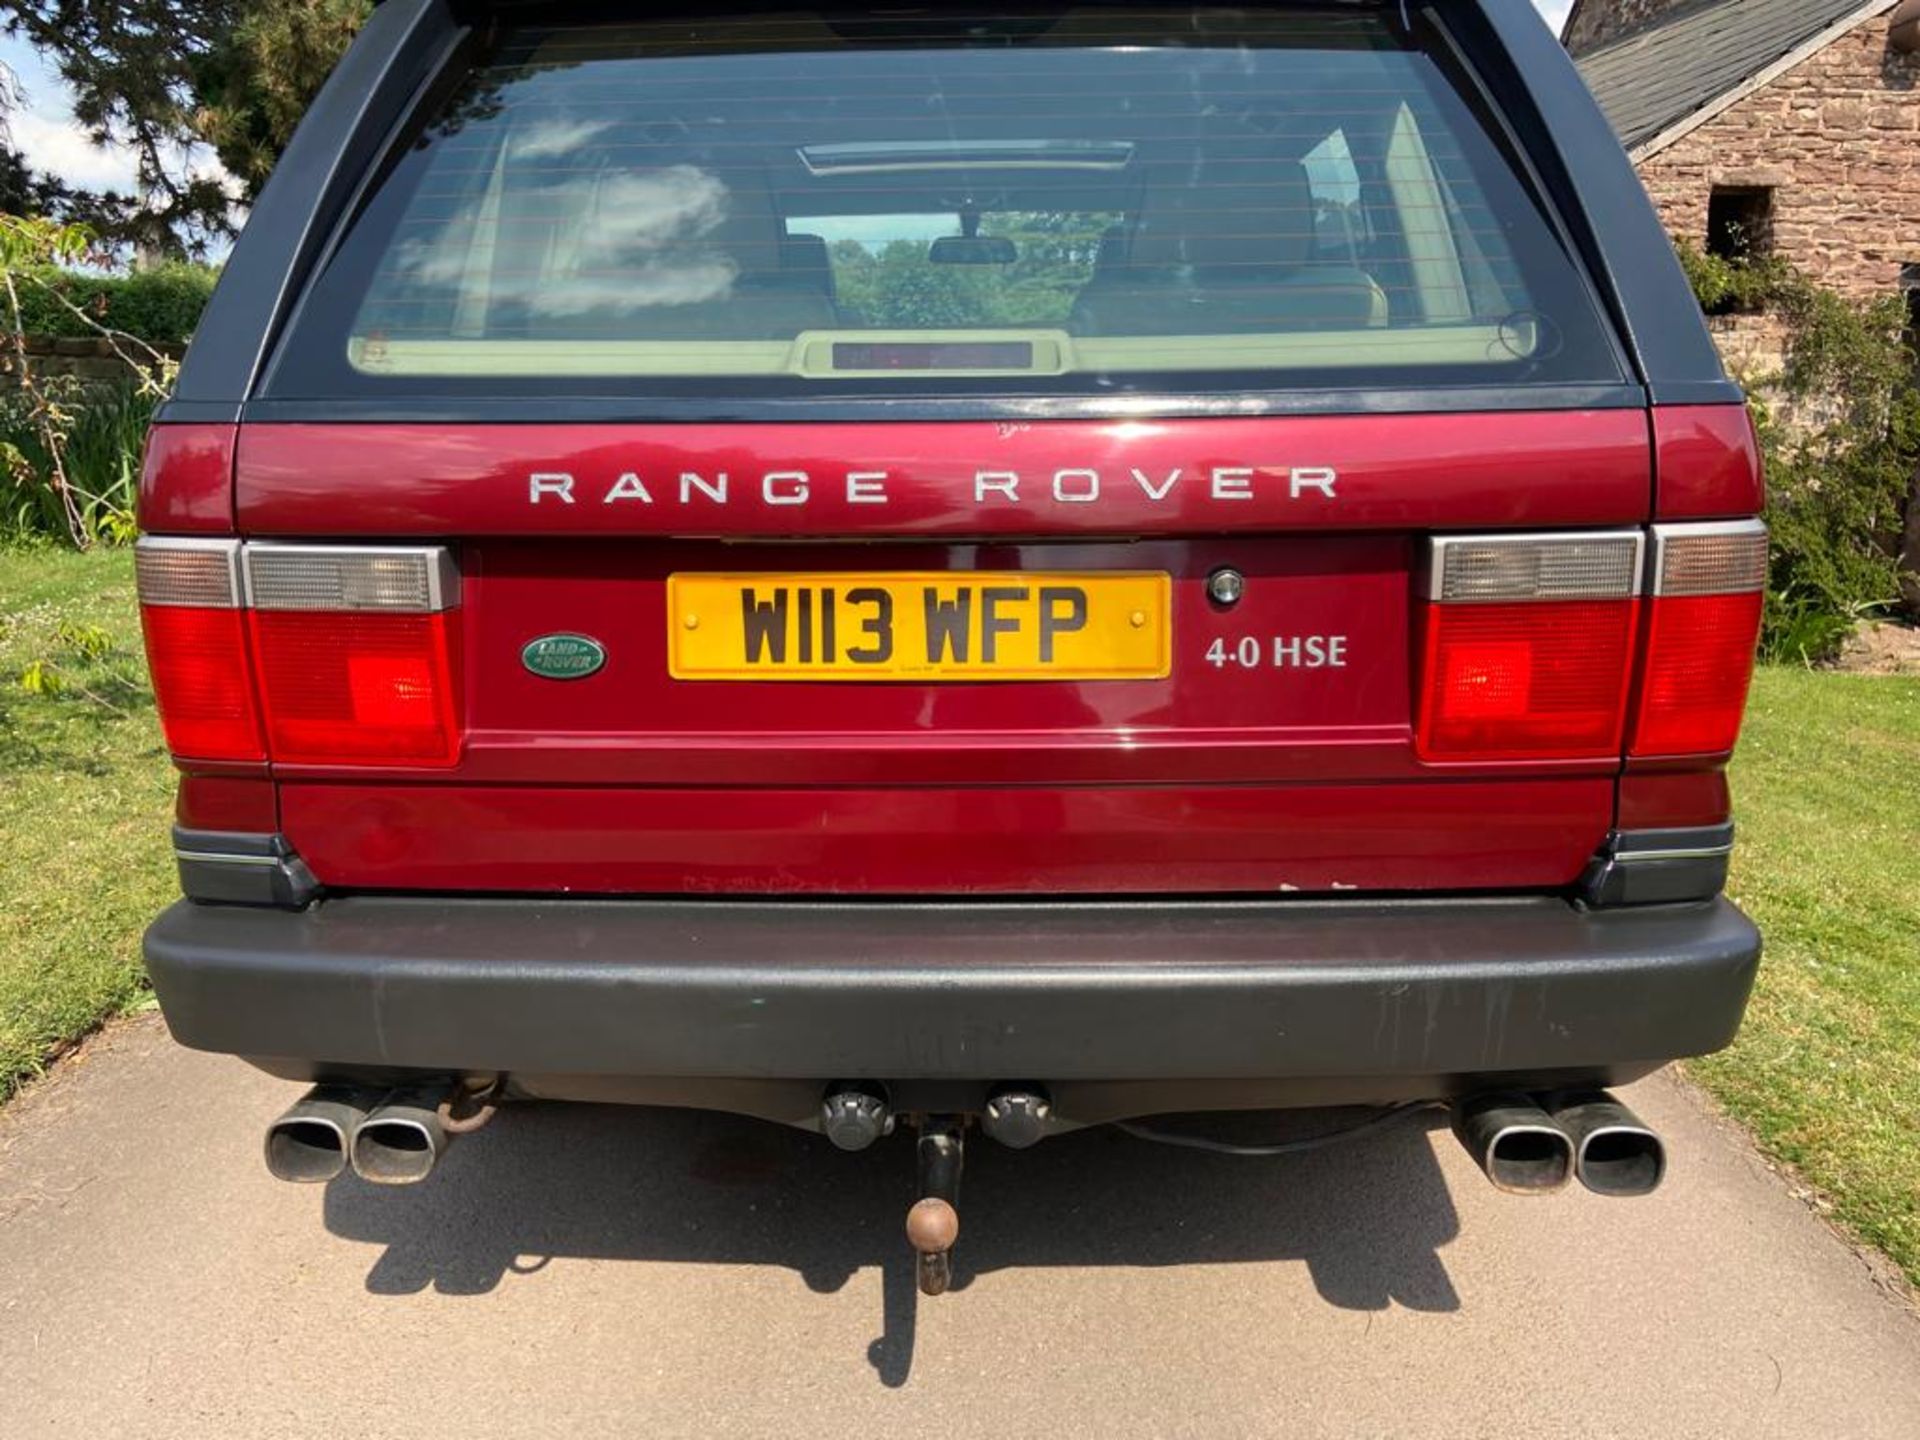 2000 Range Rover HSE - Image 4 of 51